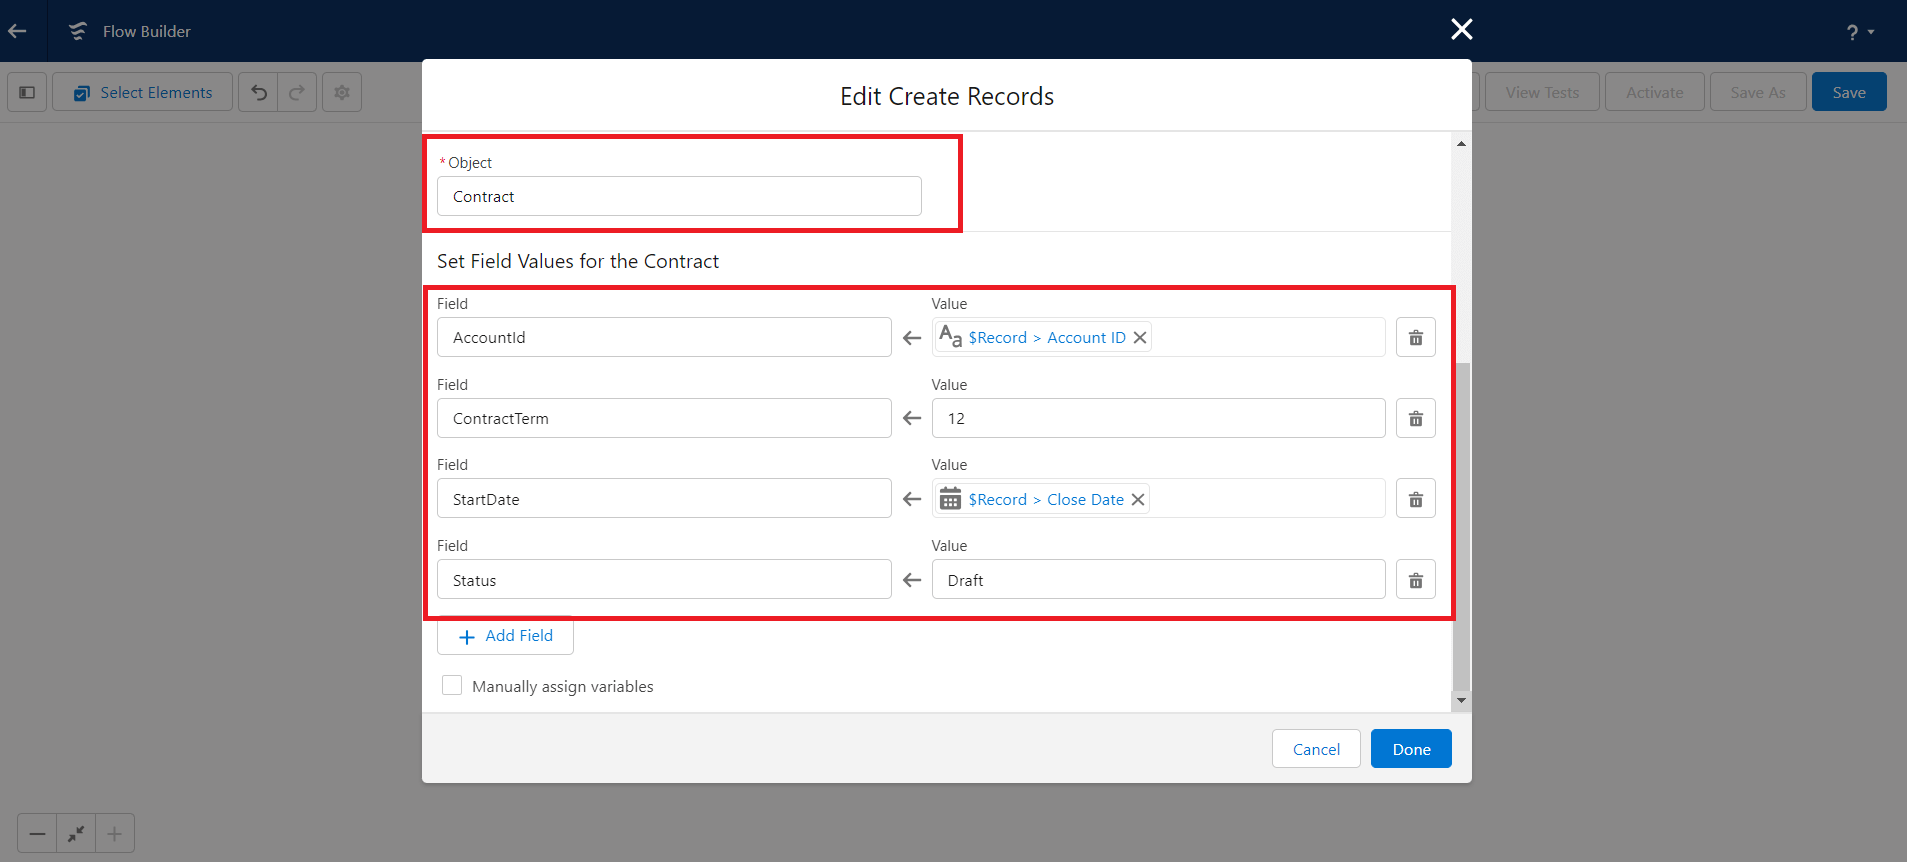 preview button to check how your form is looks